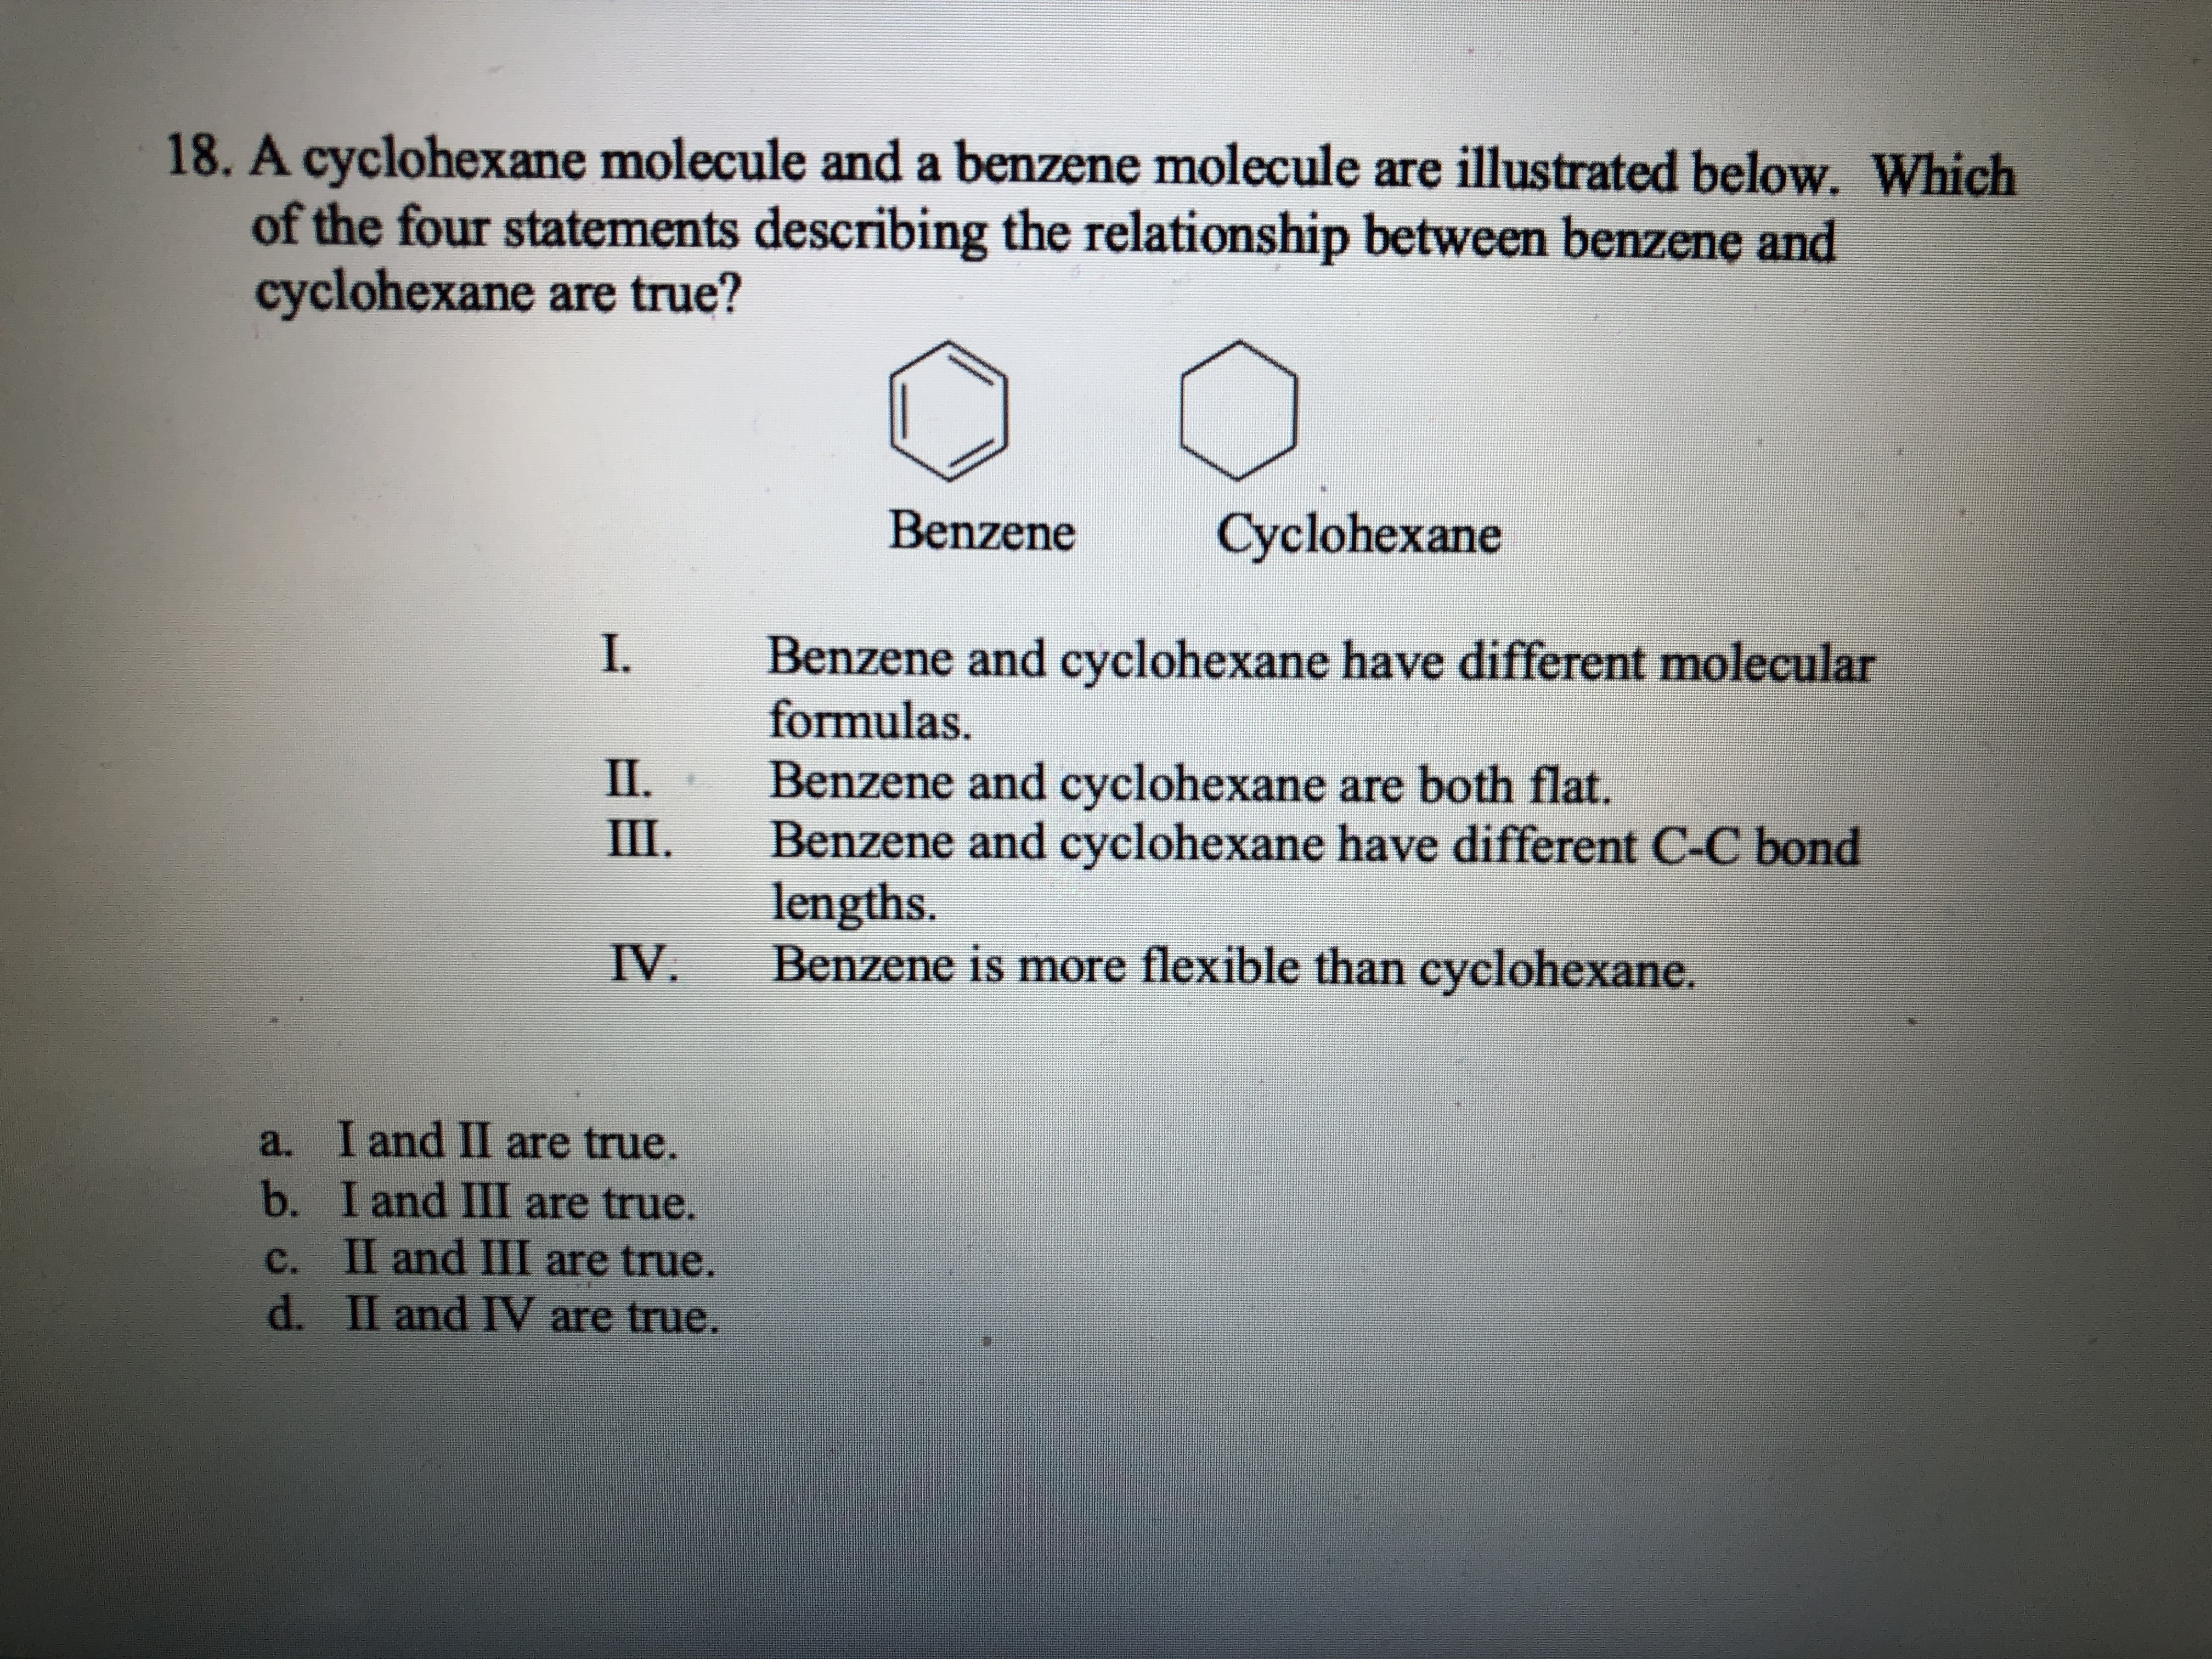 18. A cyclohexane molecule and a benzene molecule are illustrated below. Which
of the four statements describing the relationship between benzene and
cyclohexane are true?
Benzene
Cyclohexane
Benzene and cyclohexane have different molecular
formulas.
Benzene and cyclohexane are both flat.
Benzene and cyclohexane have different C-C bond
lengths.
Benzene is more flexible than cyclohexane.
П.
Ш.
IV.
a. I and II are true.
b. I and III are true.
c. II and III are true.
d. II and IV are true.
C.
1.
